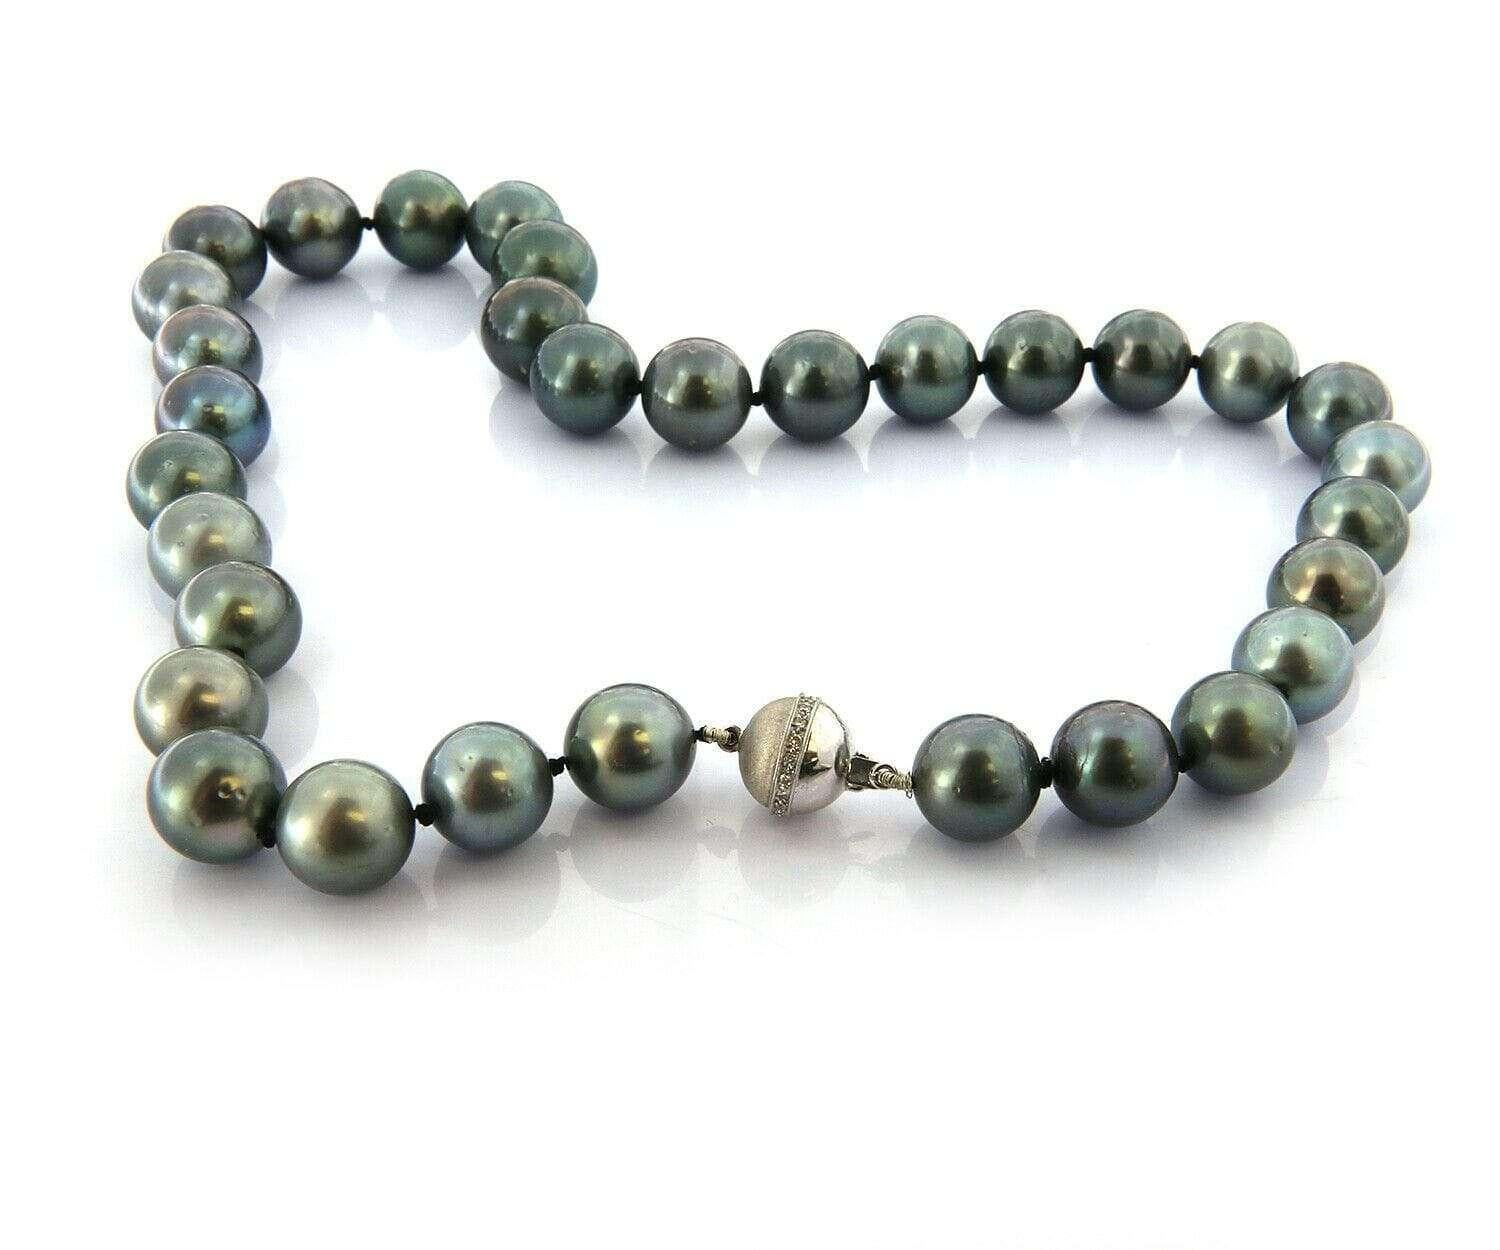 12.0 – 12.5 MM Black Cultured Tahitian Pearl Strand Necklace With 18K Clasp

Black Cultured Tahitian Pearl Strand Necklace
18K White Gold Clasp With Diamonds
Diamonds Carat Weight: Approx. 0.10 CTW
Necklace Length: Approx. 19.0 Inches
Weight: